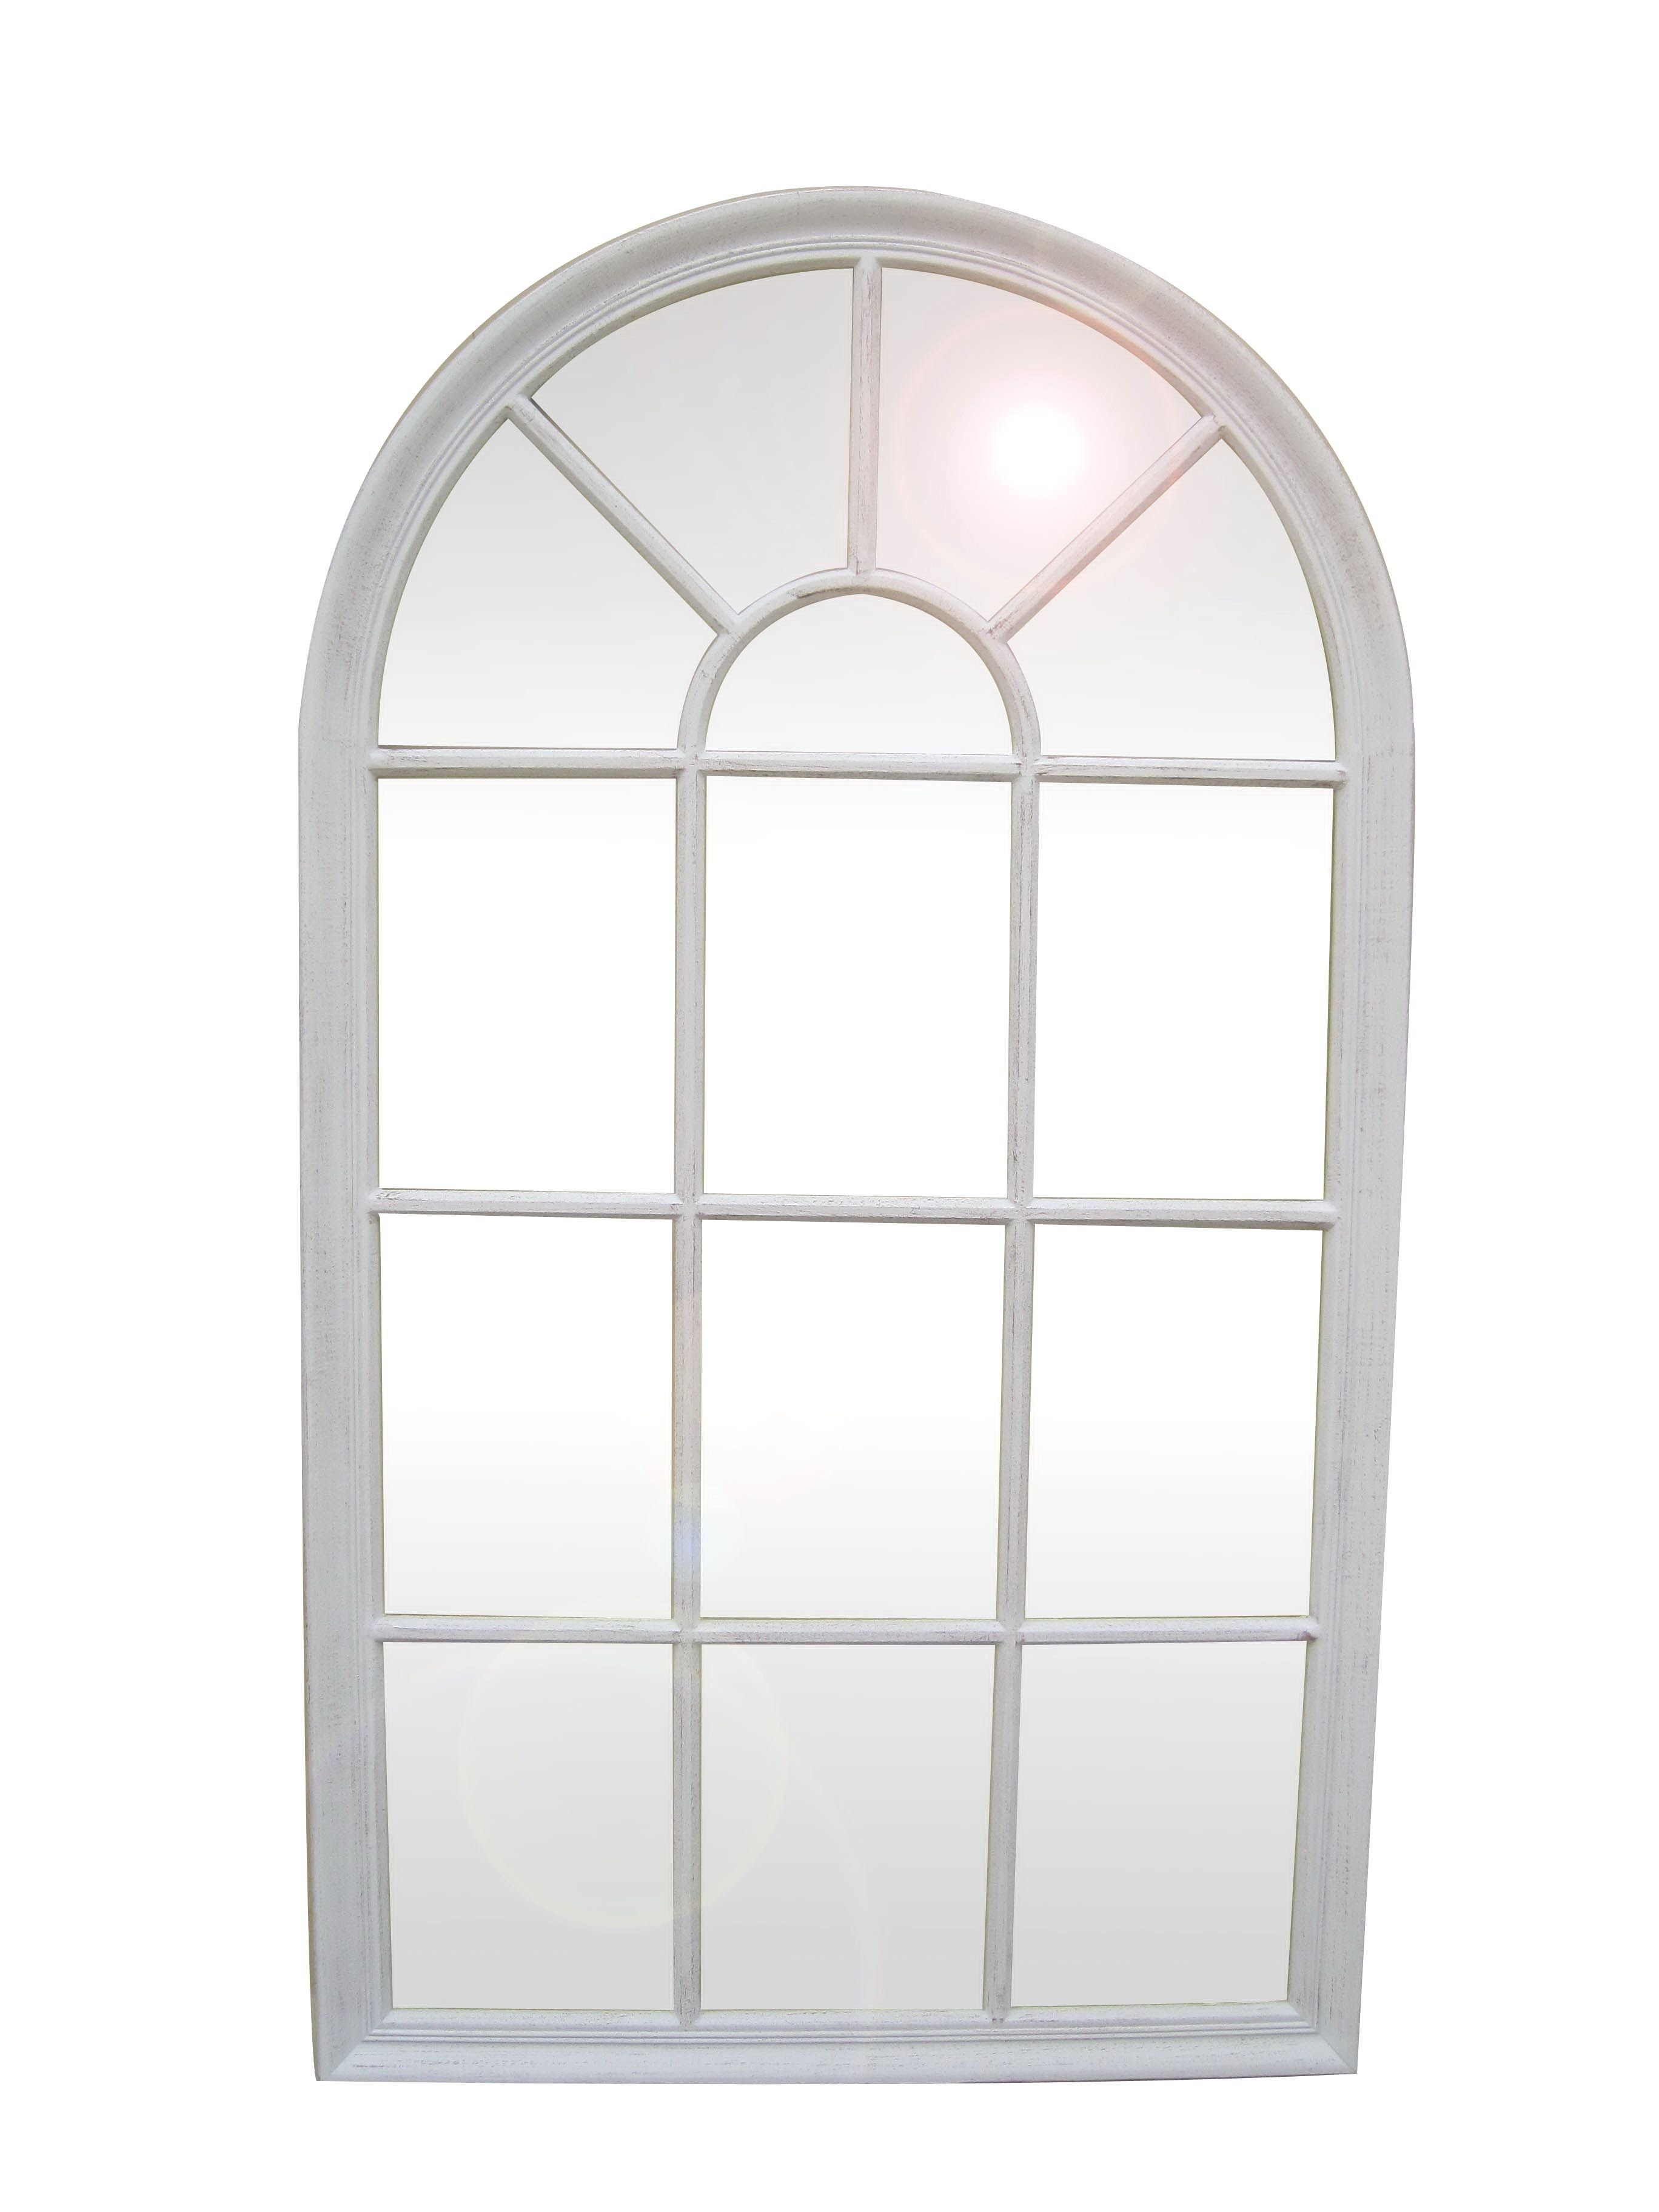 Ideas Design For Arched Window Mirror 19755 With Regard To White Arched Window Mirror (View 3 of 15)